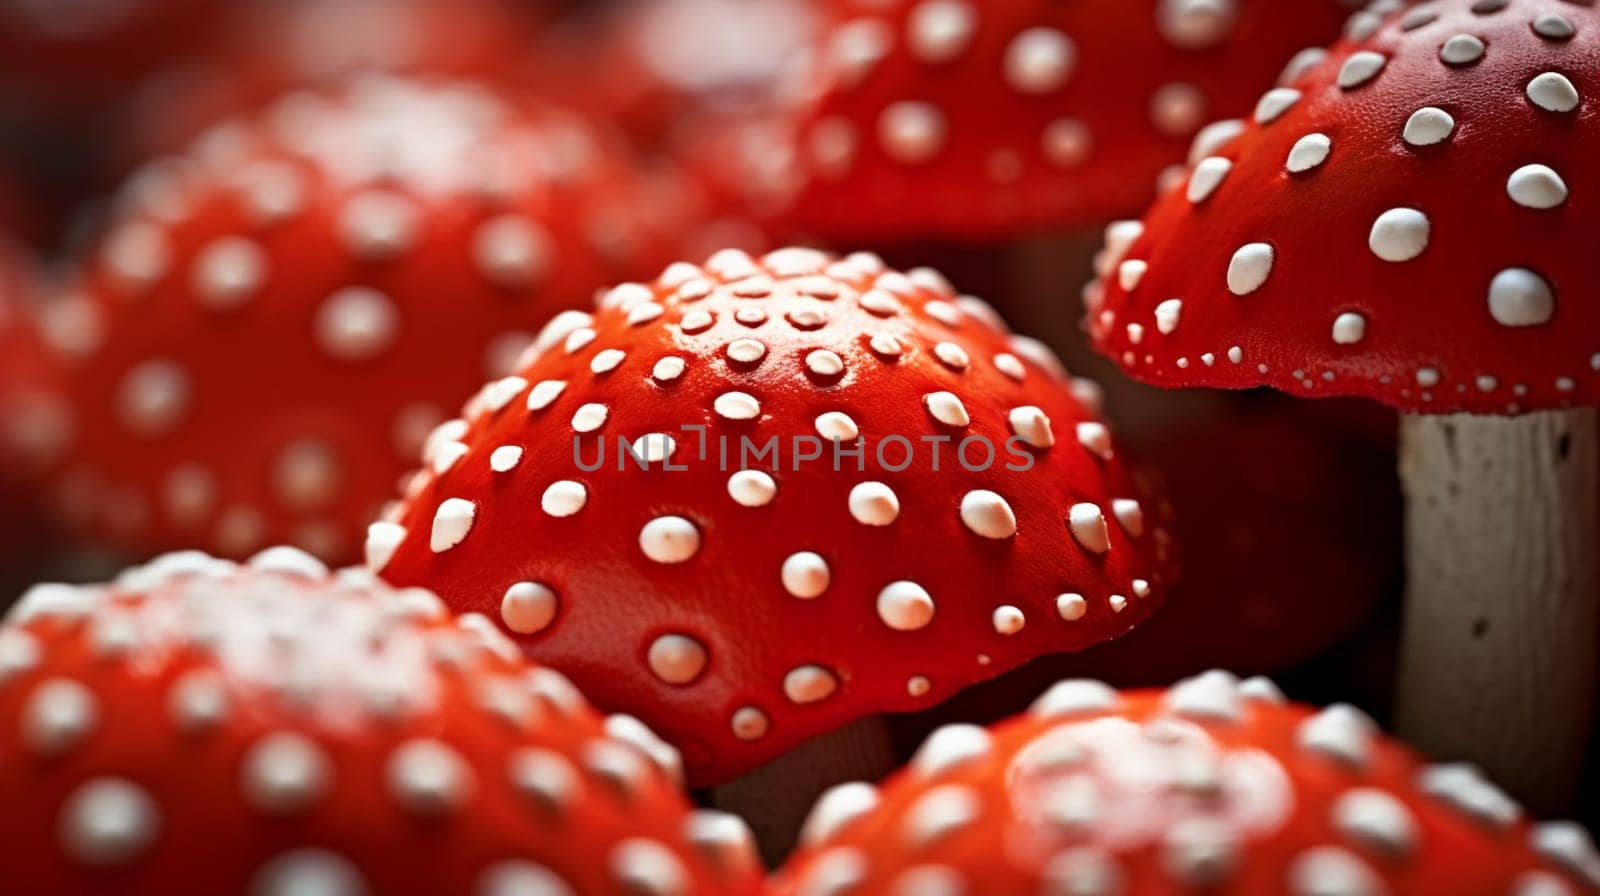 Vibrant red mushrooms with white spots, close-up, with a blurry background by kizuneko